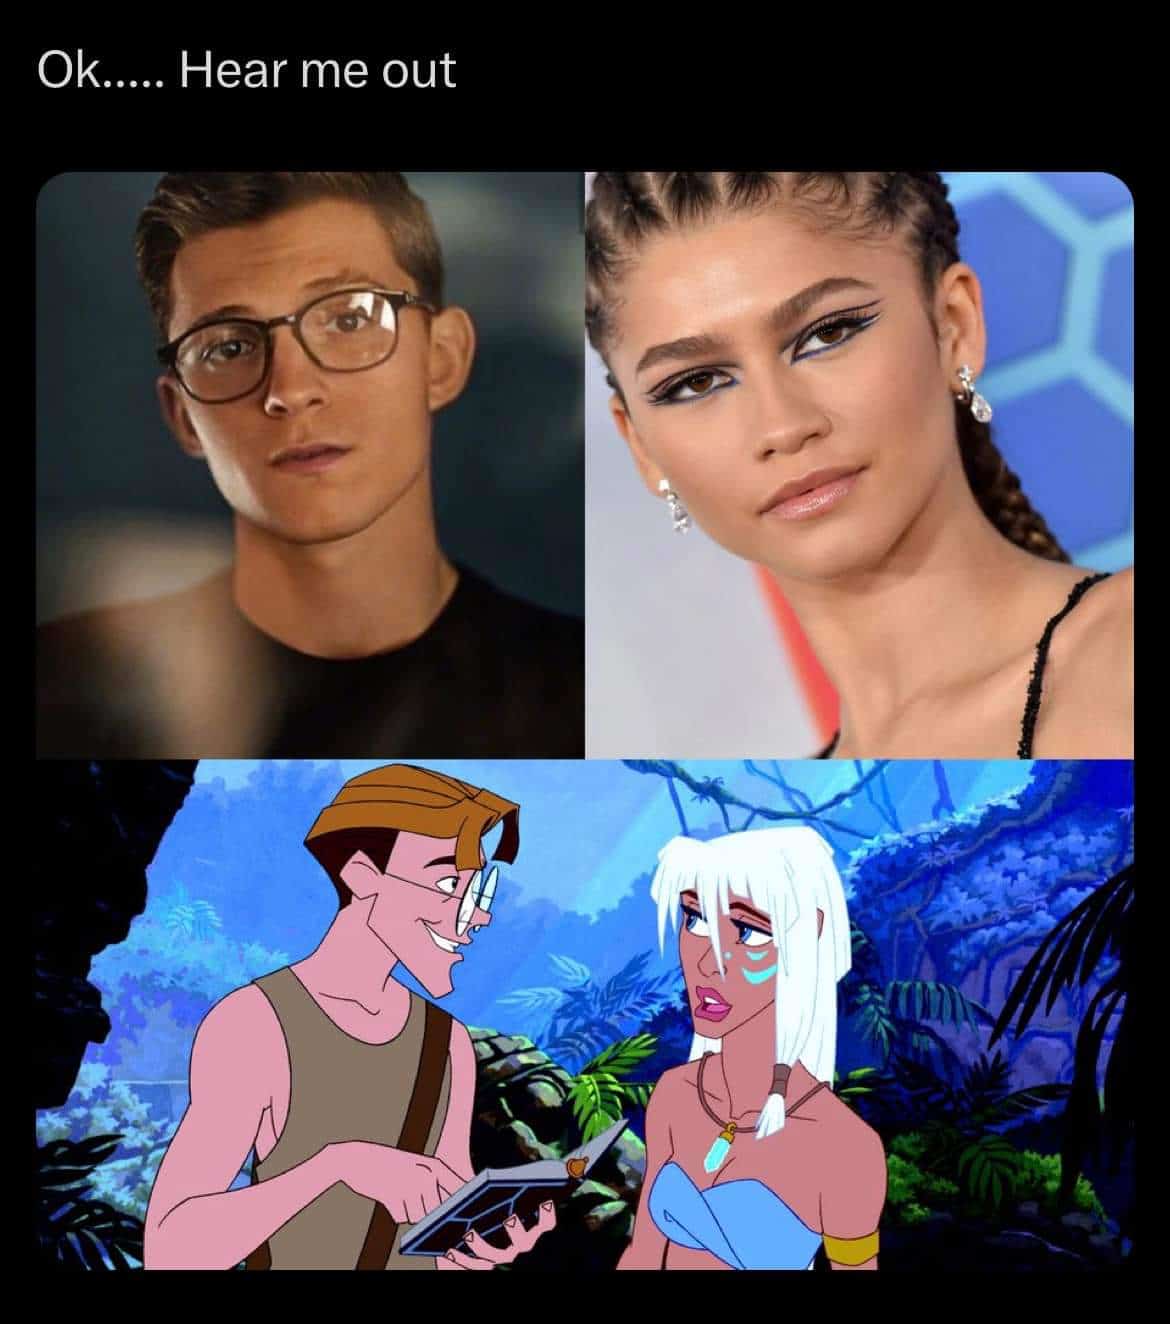 Atlantis: The Lost Empire Live-Action Movie - Fans Want Tom Holland & Zendaya